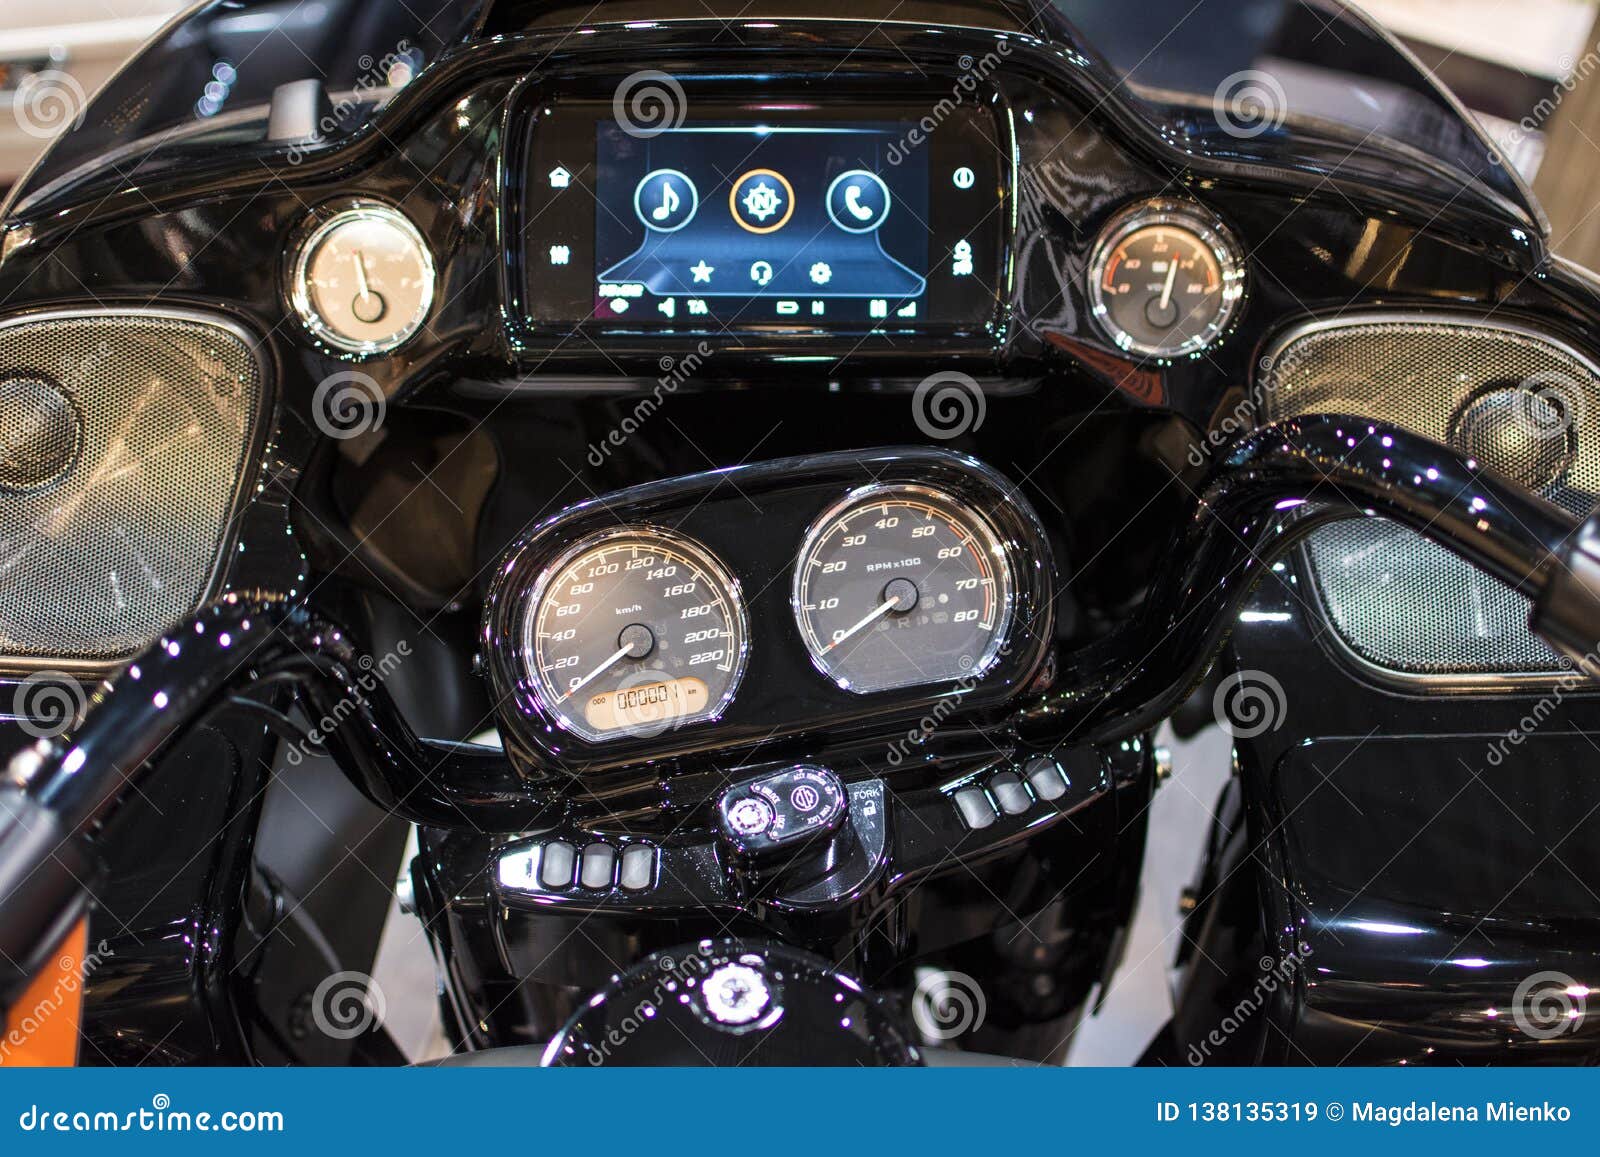 The Dashboard Of A Motorcycle Harley Davidson Road Glide 2016 Editorial Photography Image Of Shine Close 70810787